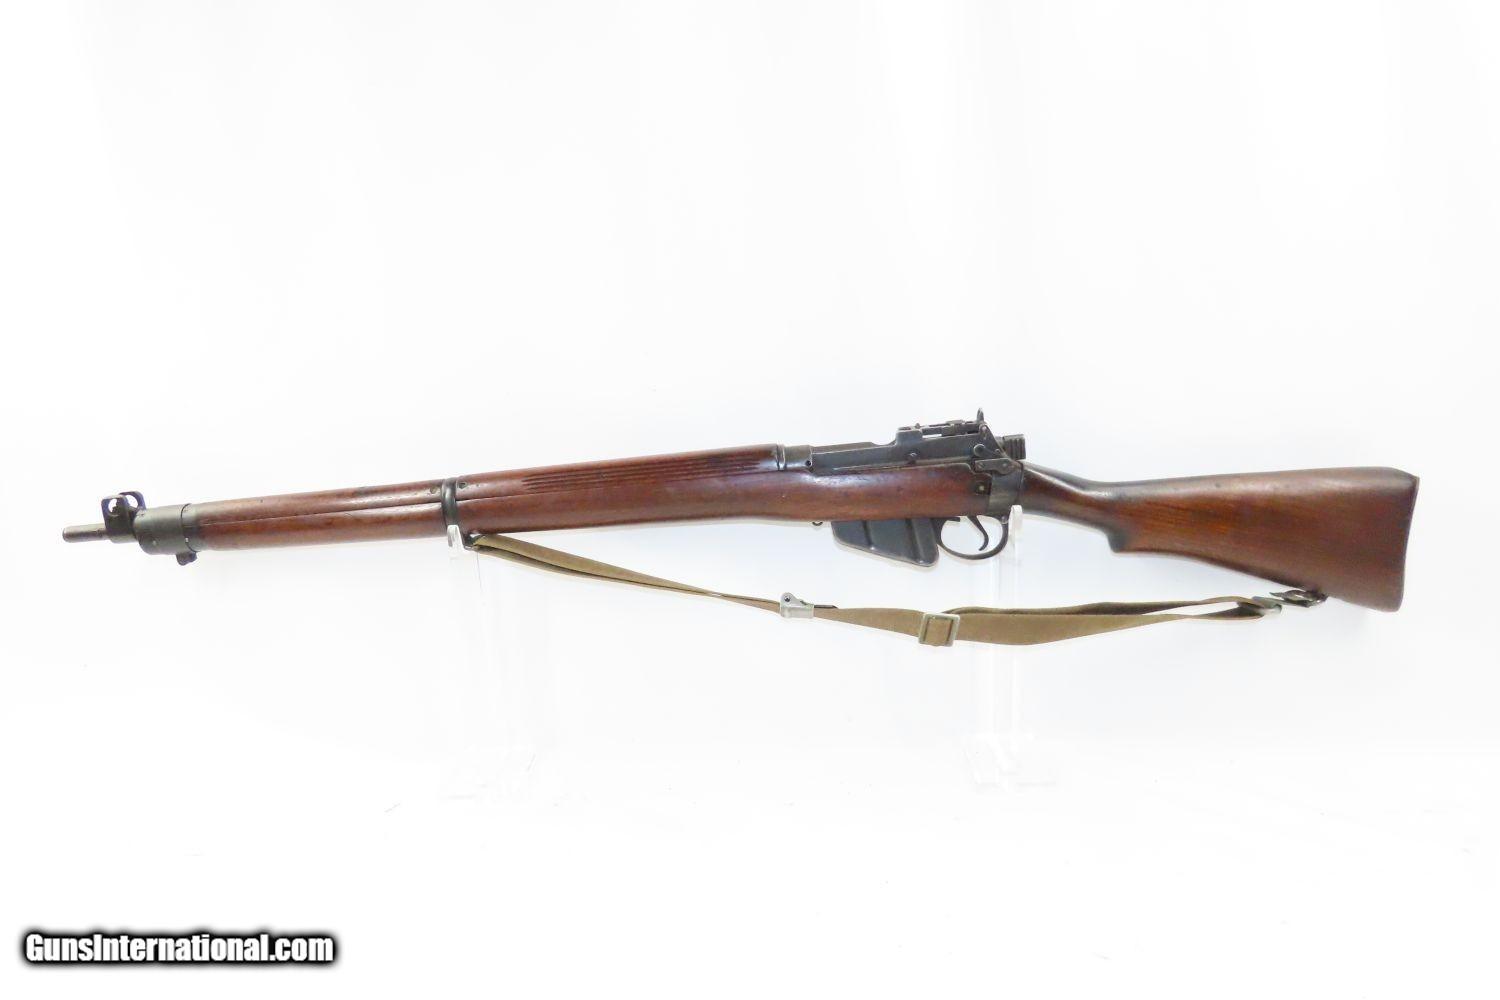 1942 Date WORLD WAR II Era LONG BRANCH Enfield No. 4 Mk1 C&R MILITARY Rifle  Primary INFANTRY Weapon of ENGLAND & CANADA